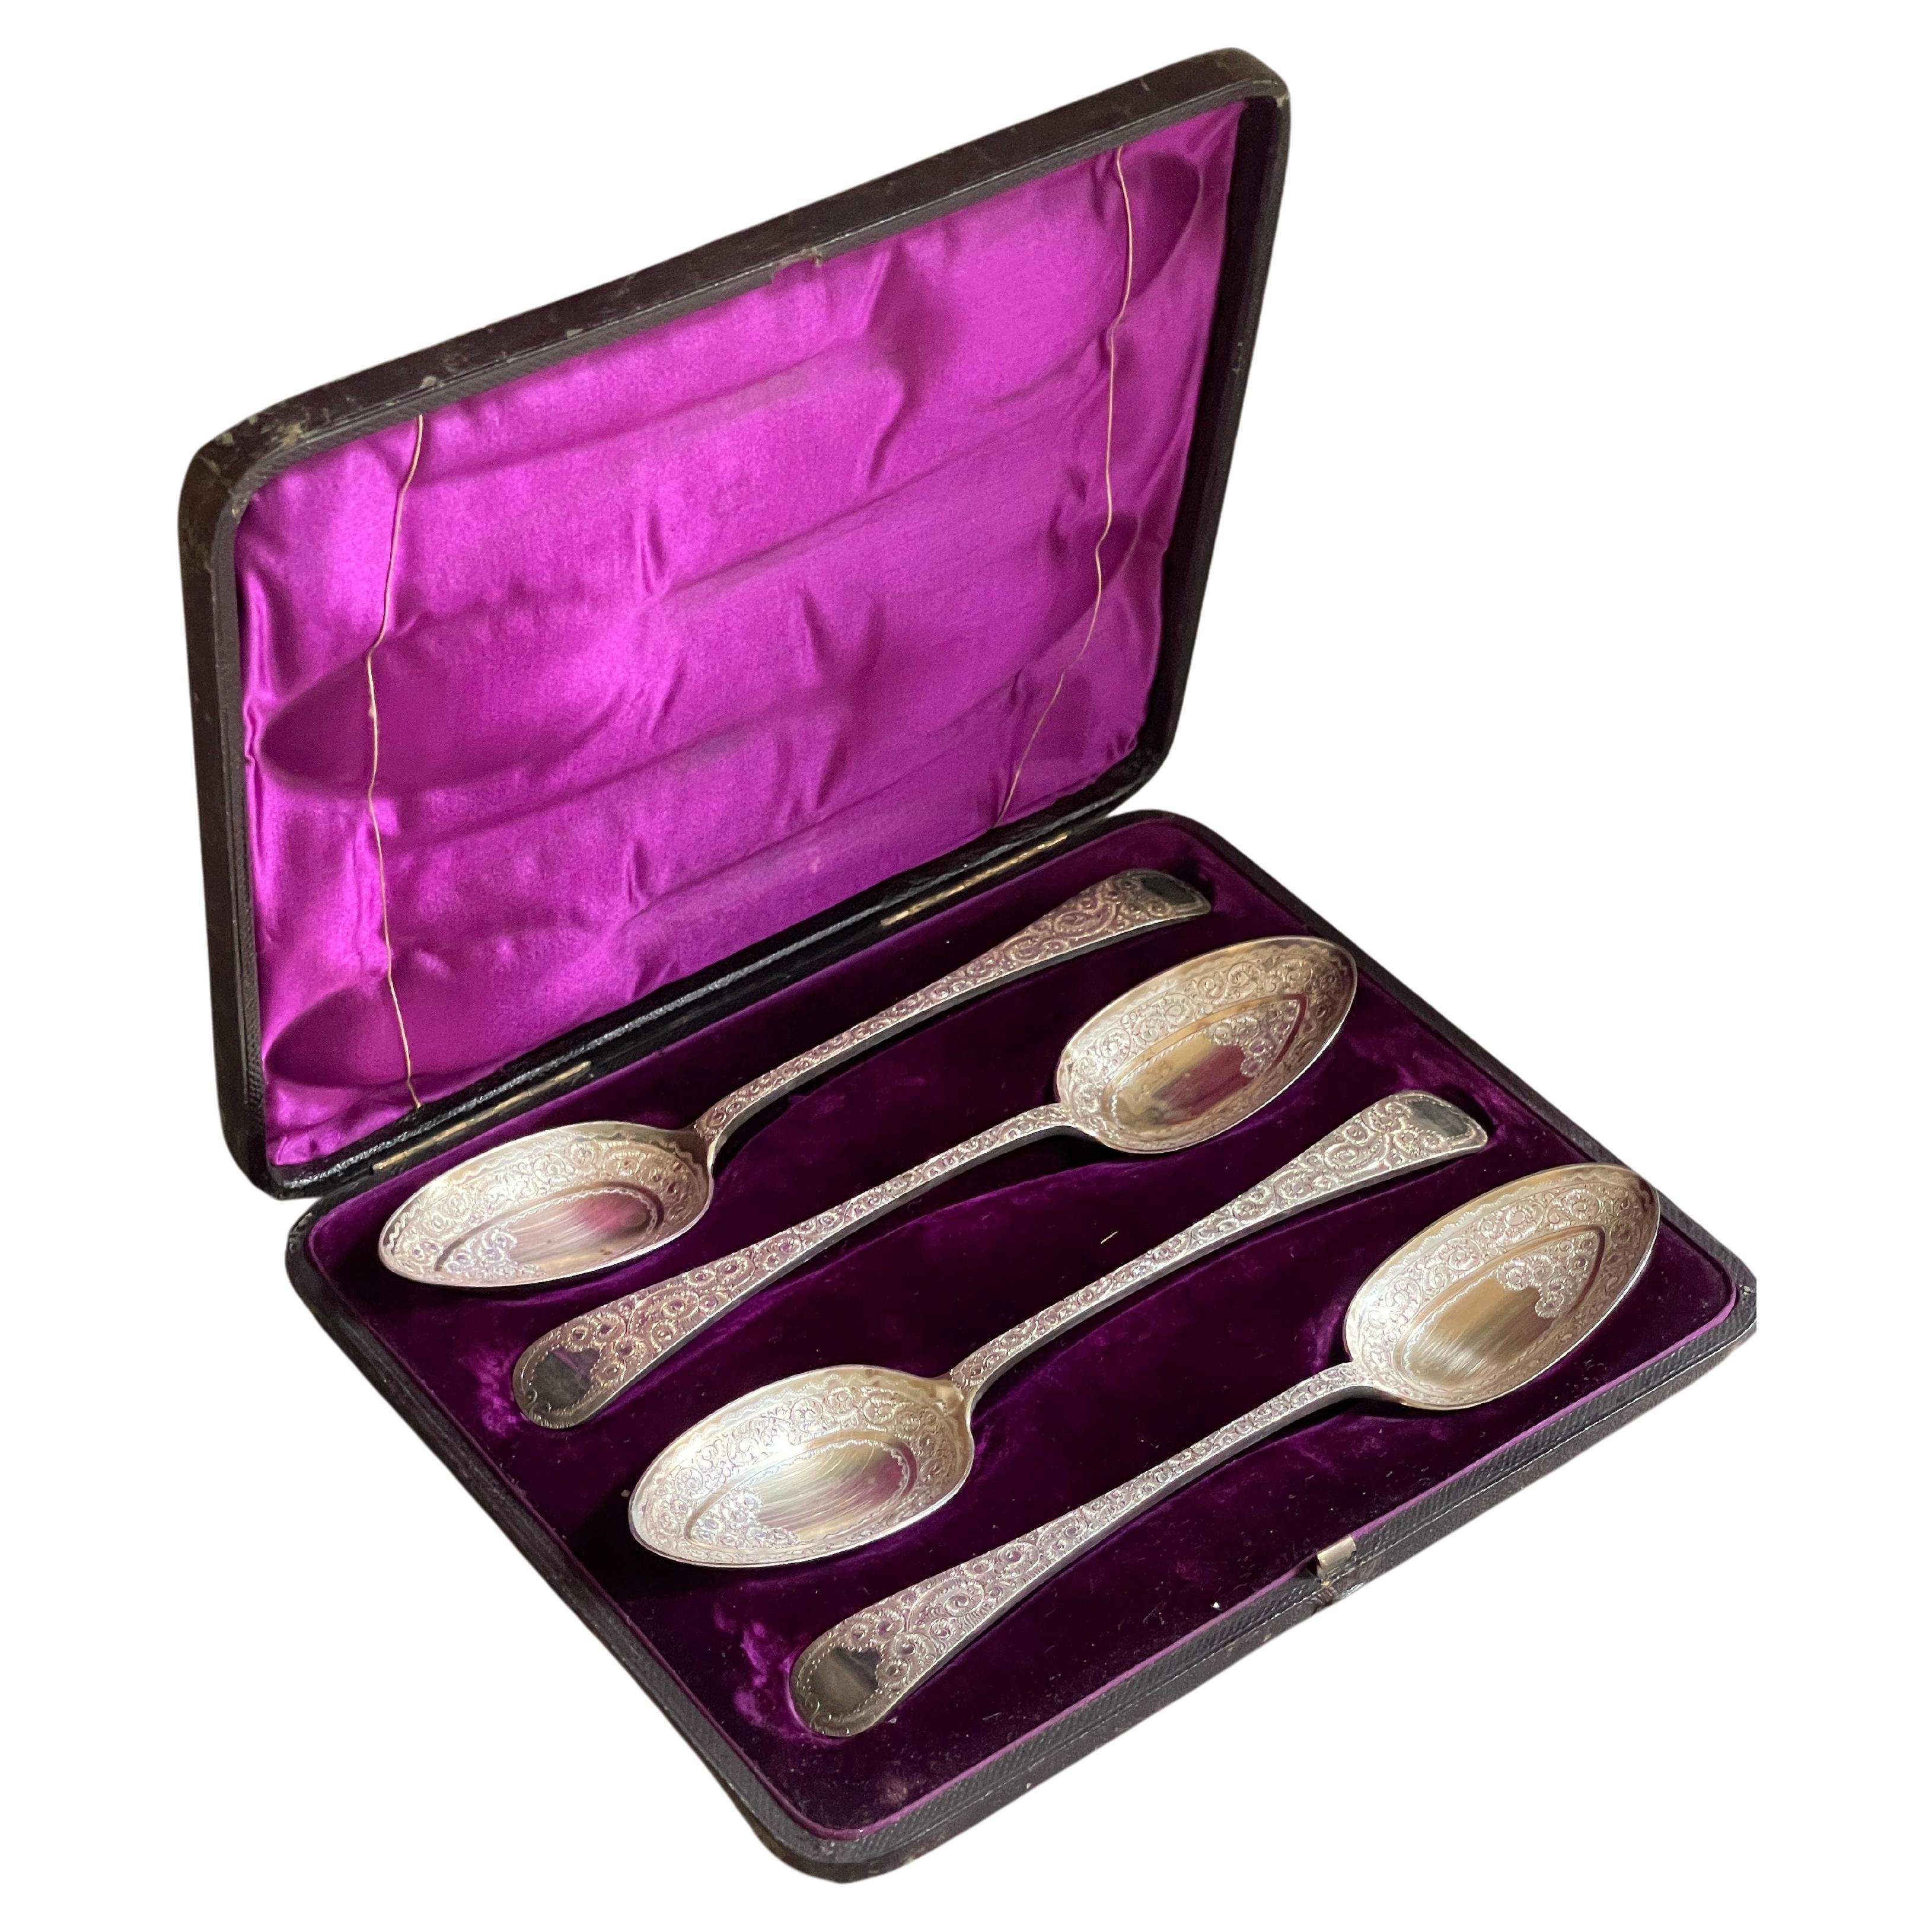 Exclusive Silver SPOONS, 4 pcs. Antique Silver Dinner Spoon & Box Flat Ware